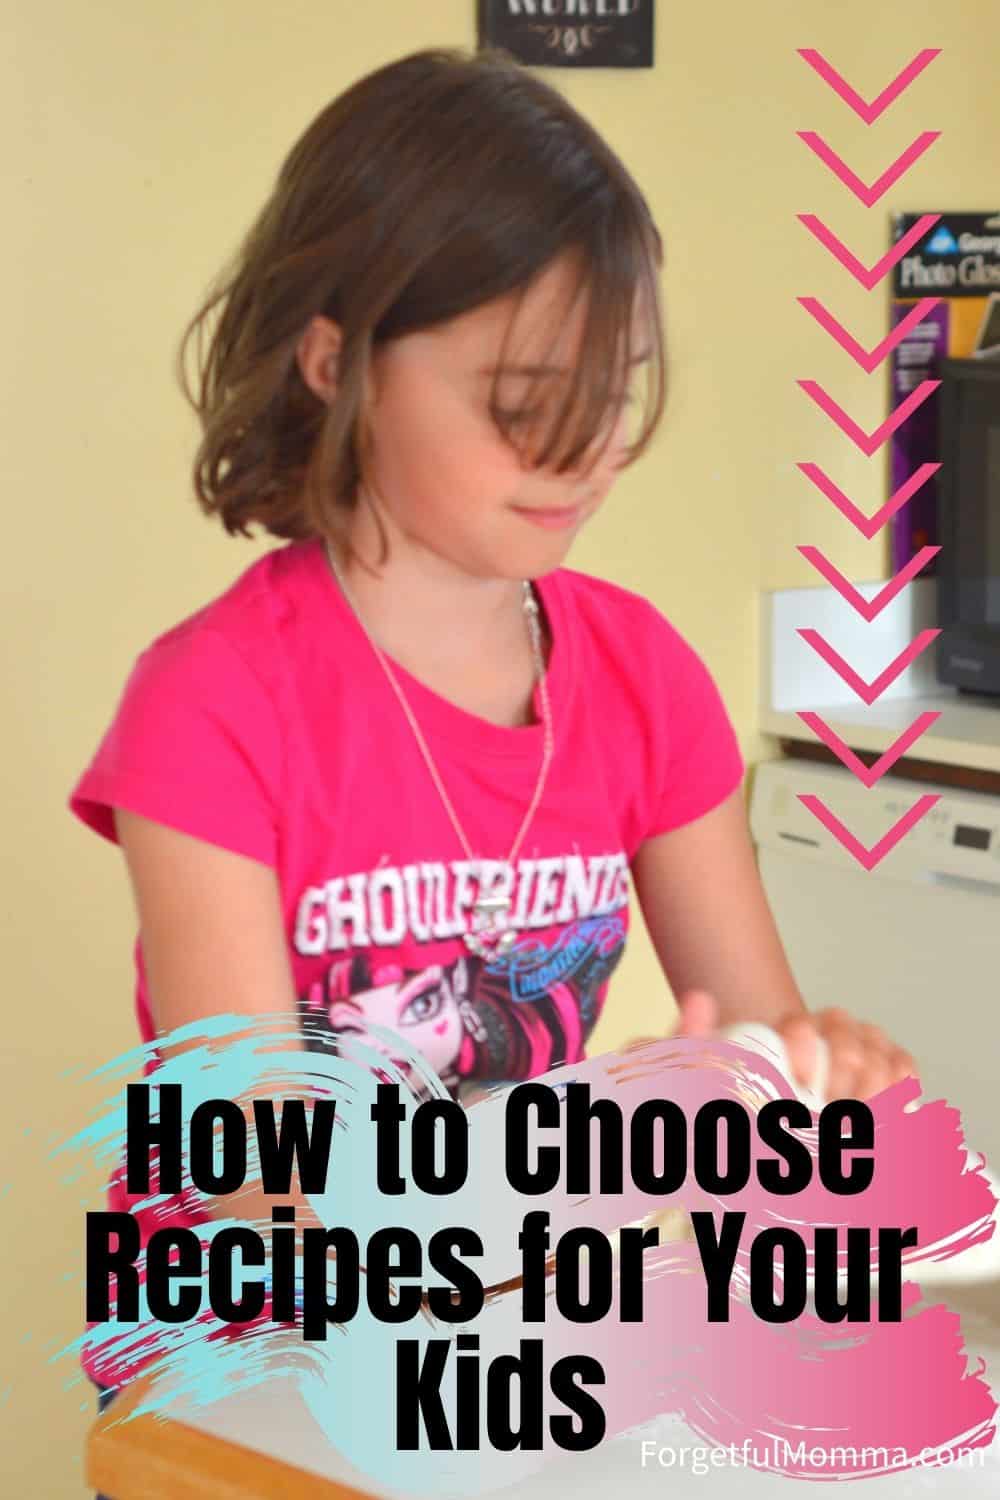 How to Choose Recipes for Your Kids